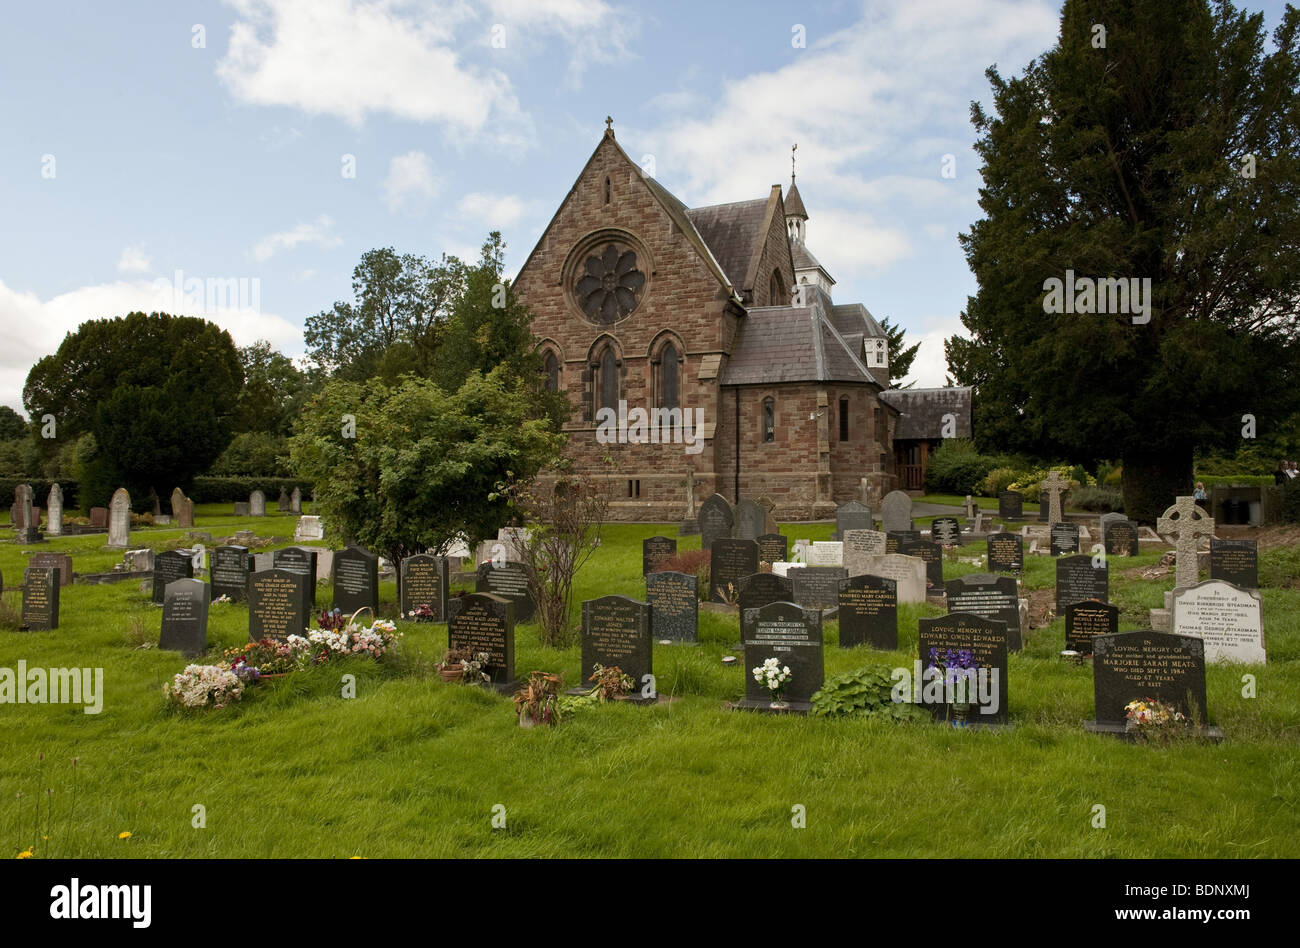 Gable end of a rural village stone-walled church as seen across the headstones in the graveyard on a blue skied summers day Stock Photo